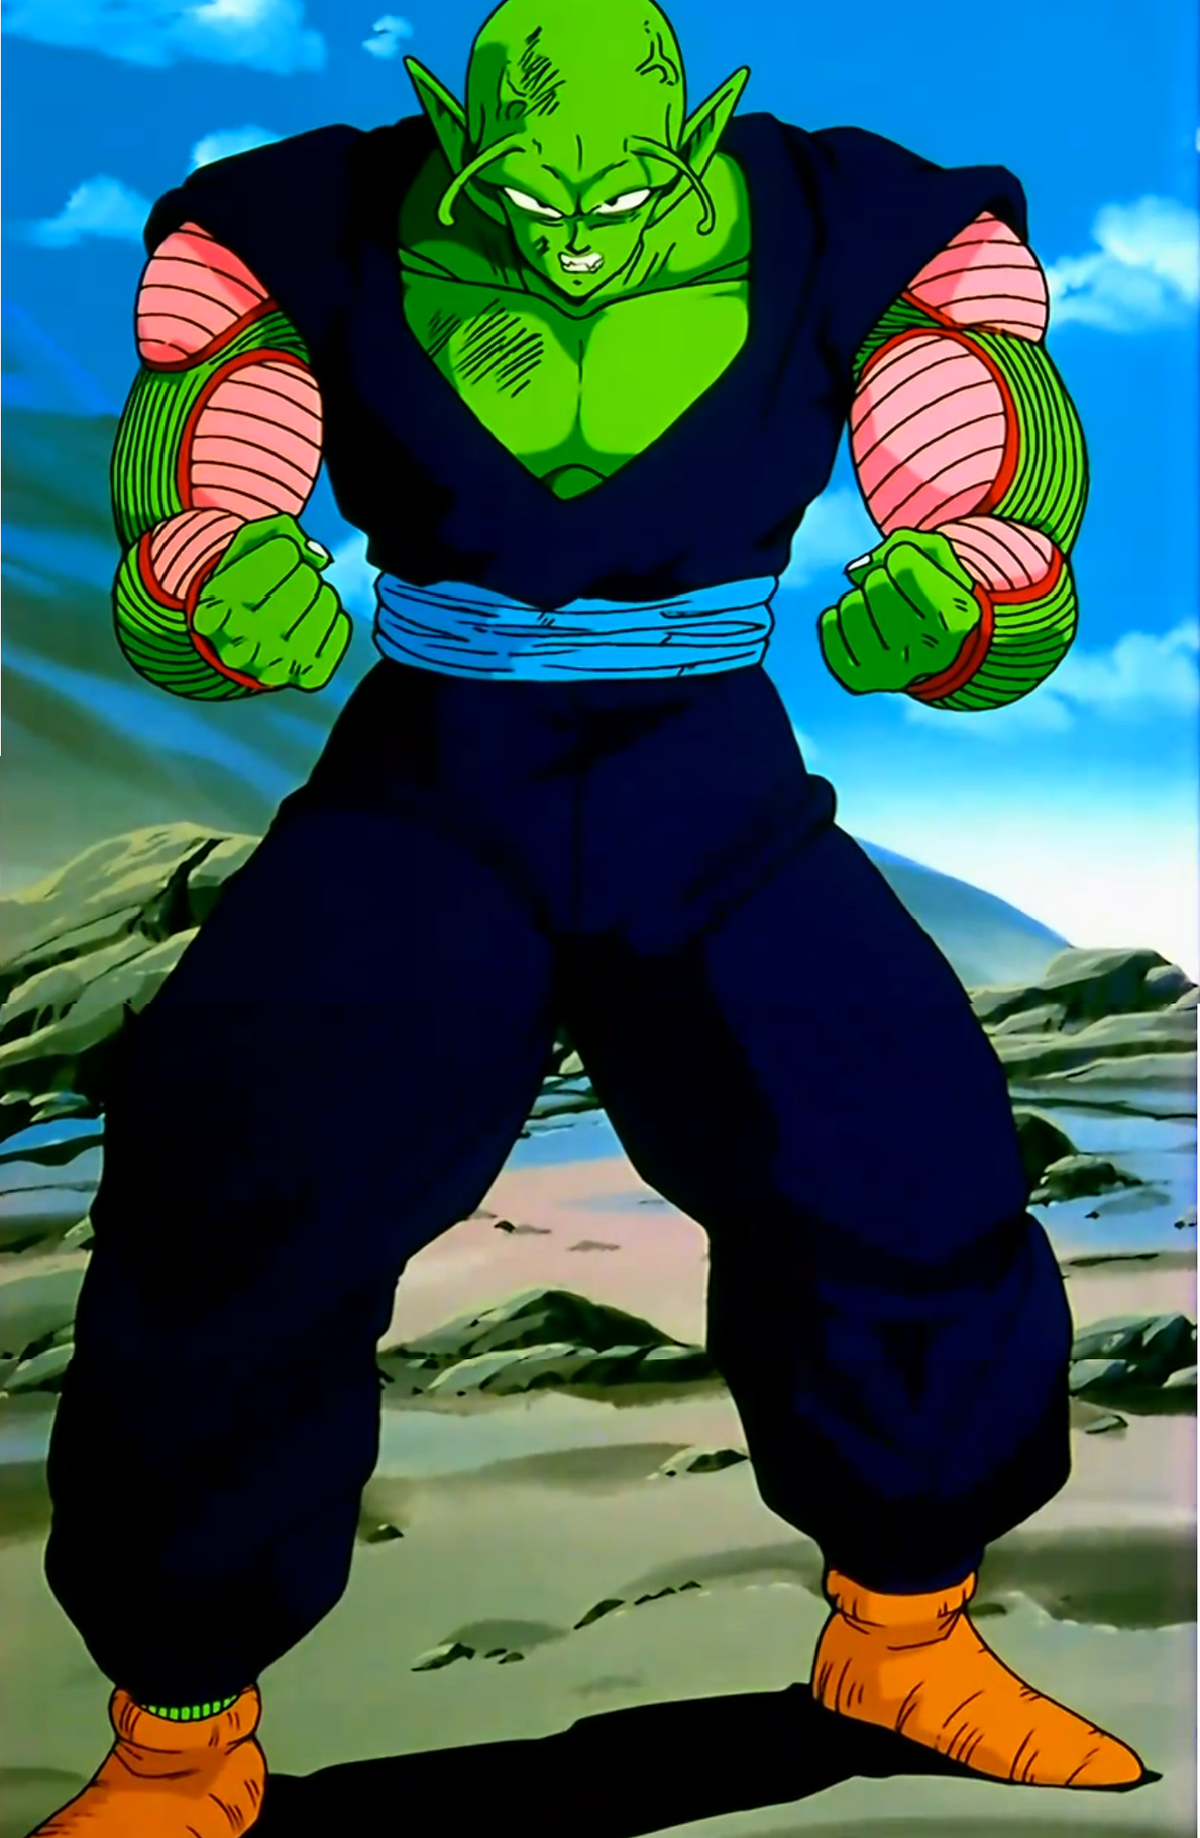 Would you guys have preferred Super Hero to remain as a solo Piccolo film?  How well would it have been received? : r/Dragonballsuper